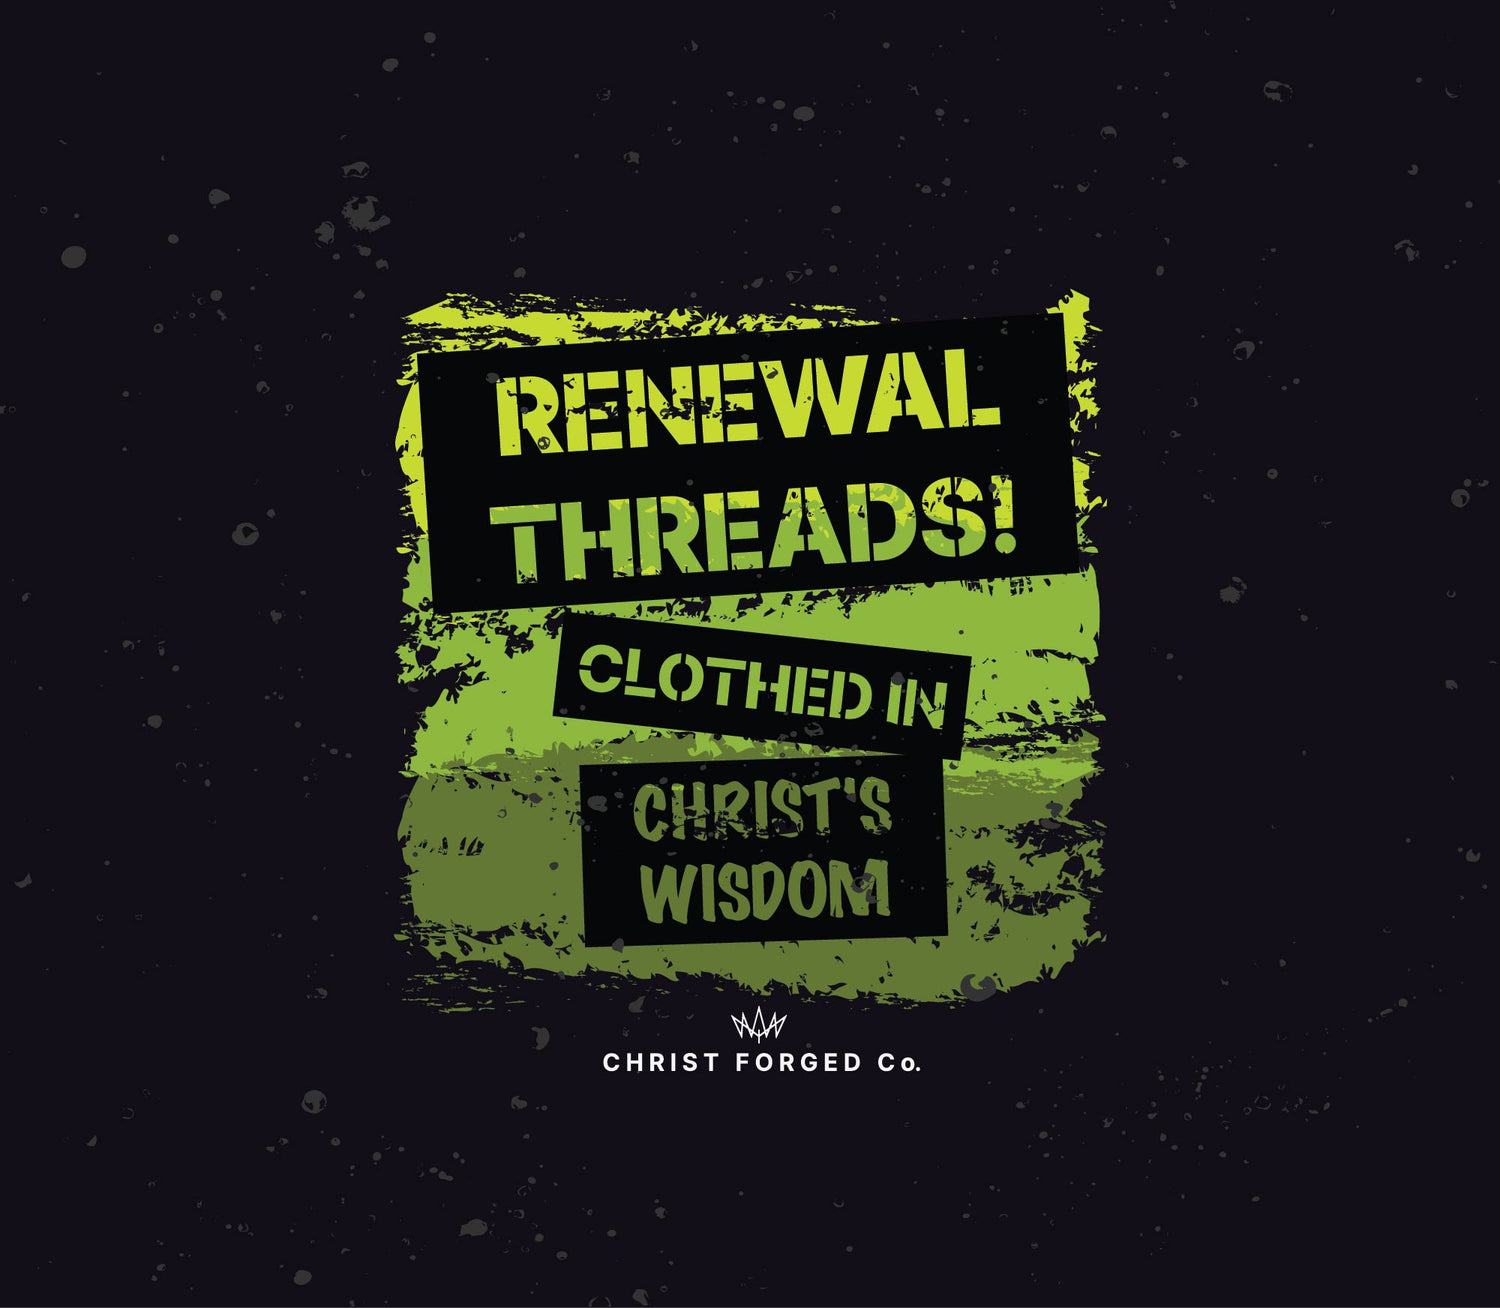 Renewal Threads: Clothed in Christ's Wisdom